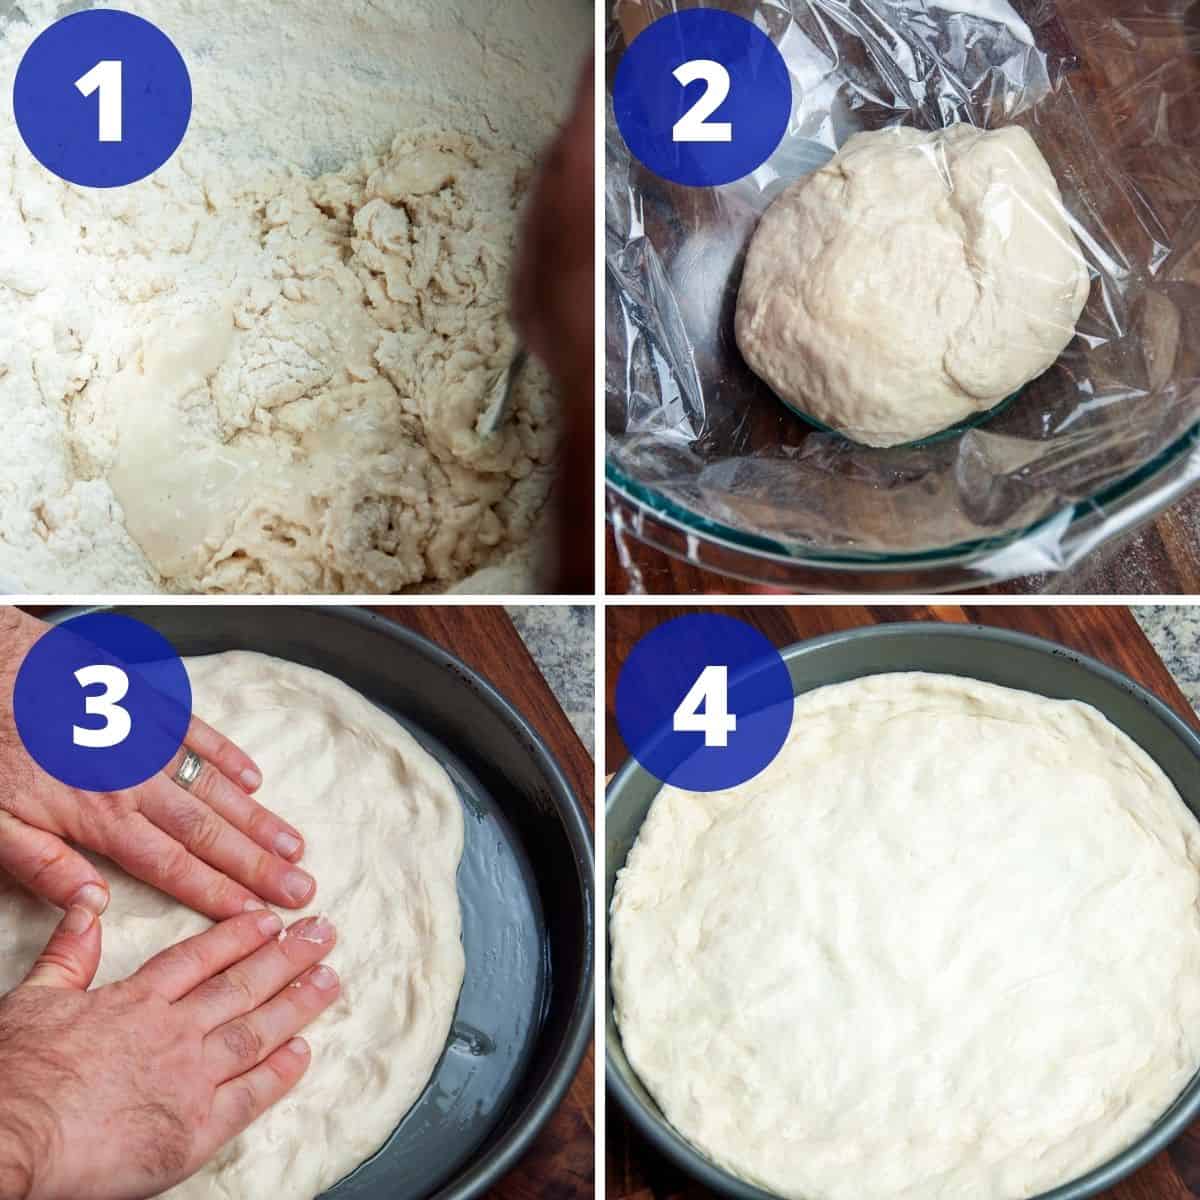 Making pizza dough and spreading in the Chicago Deep Dish pan.